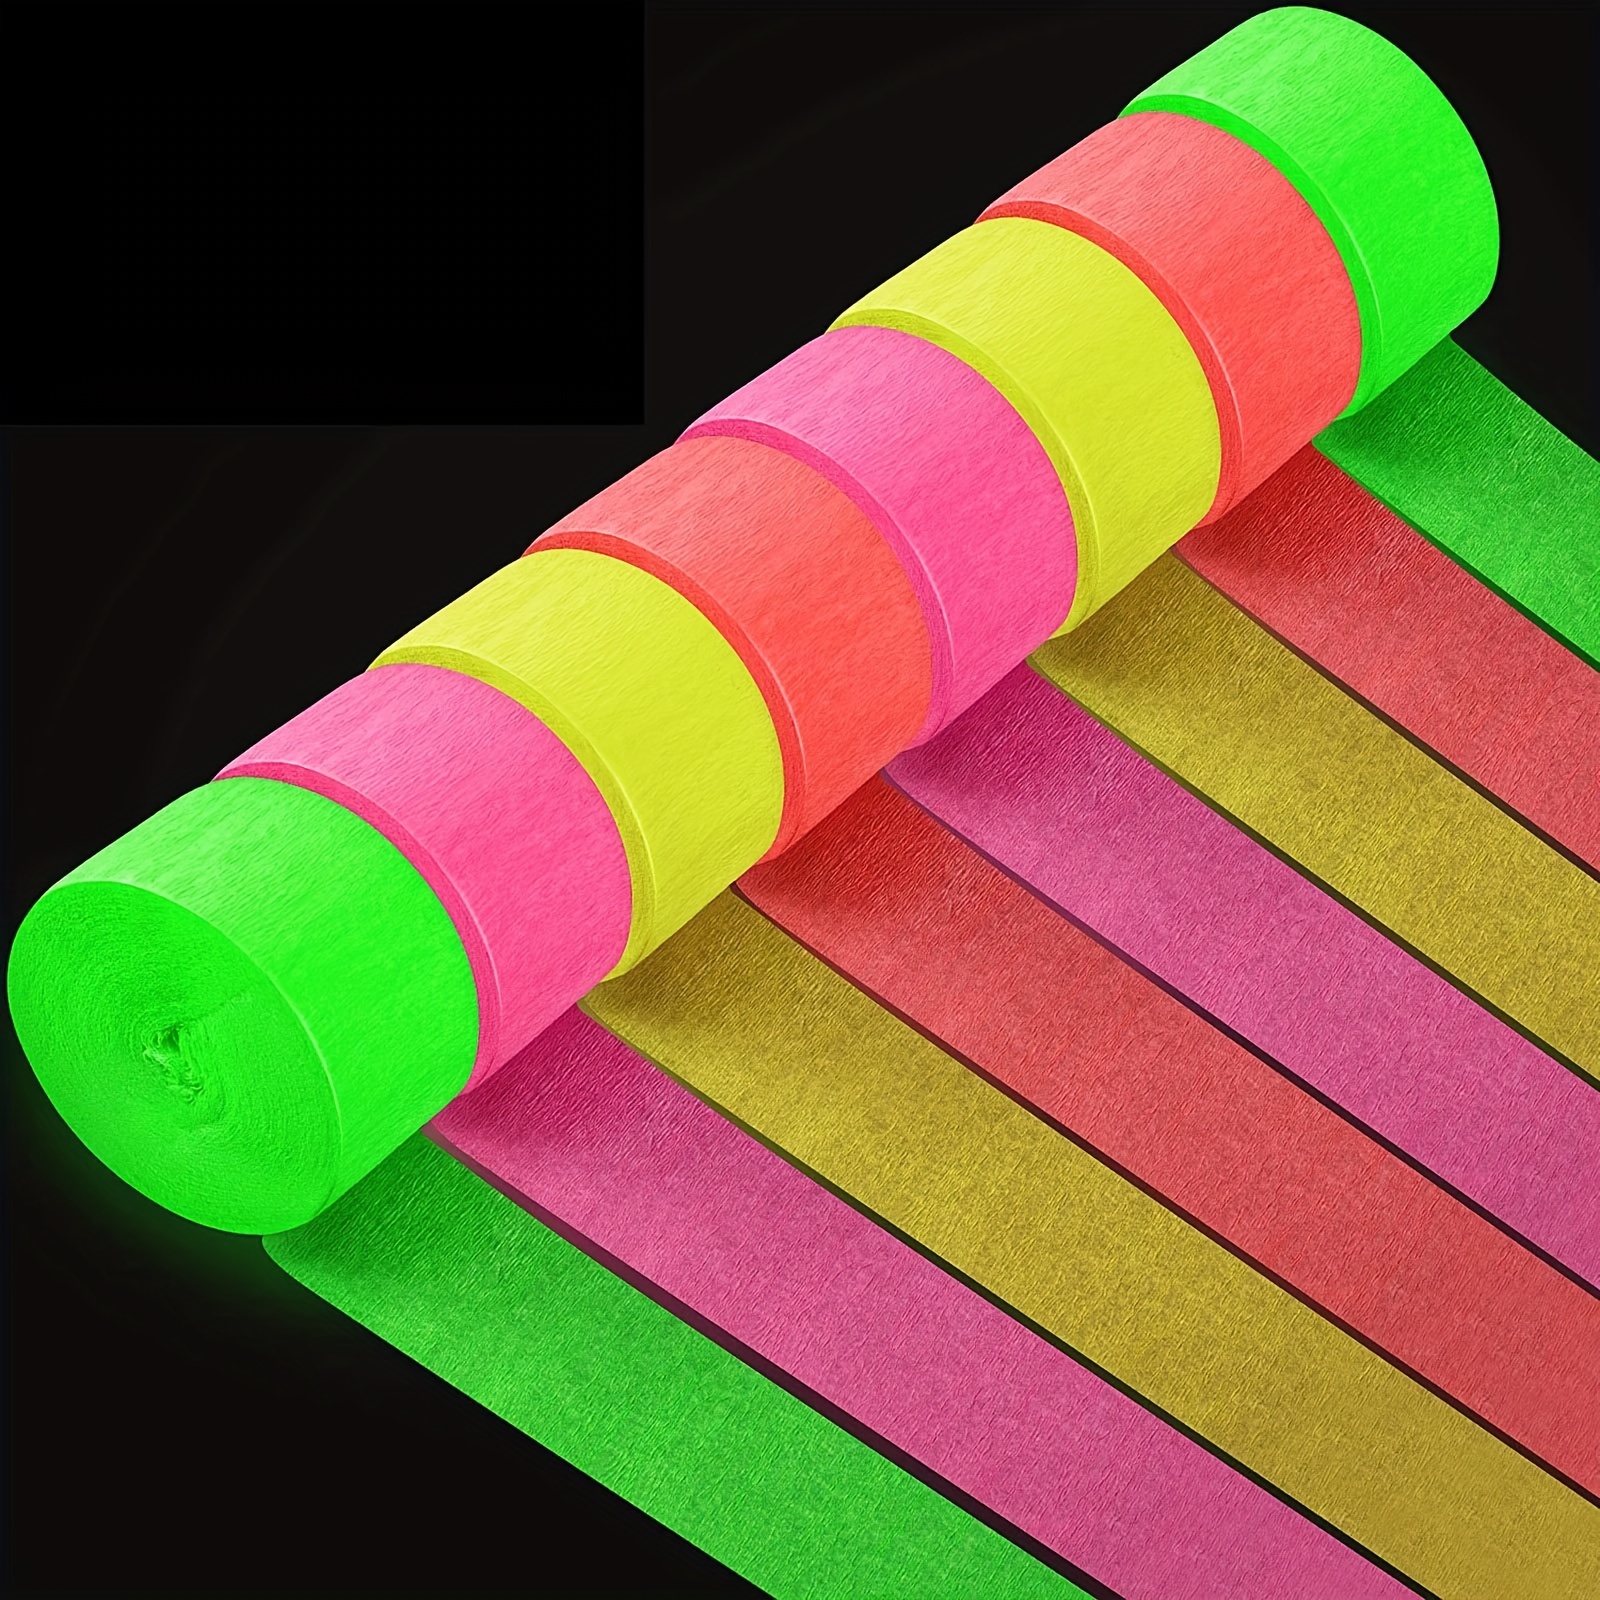 Set, UV Neon Streamers Crepe Paper Glow Party Supplies And Decorations  Fluorescent Neon Garland Paper Streamers Glow In The Dark Streamers  Blacklight